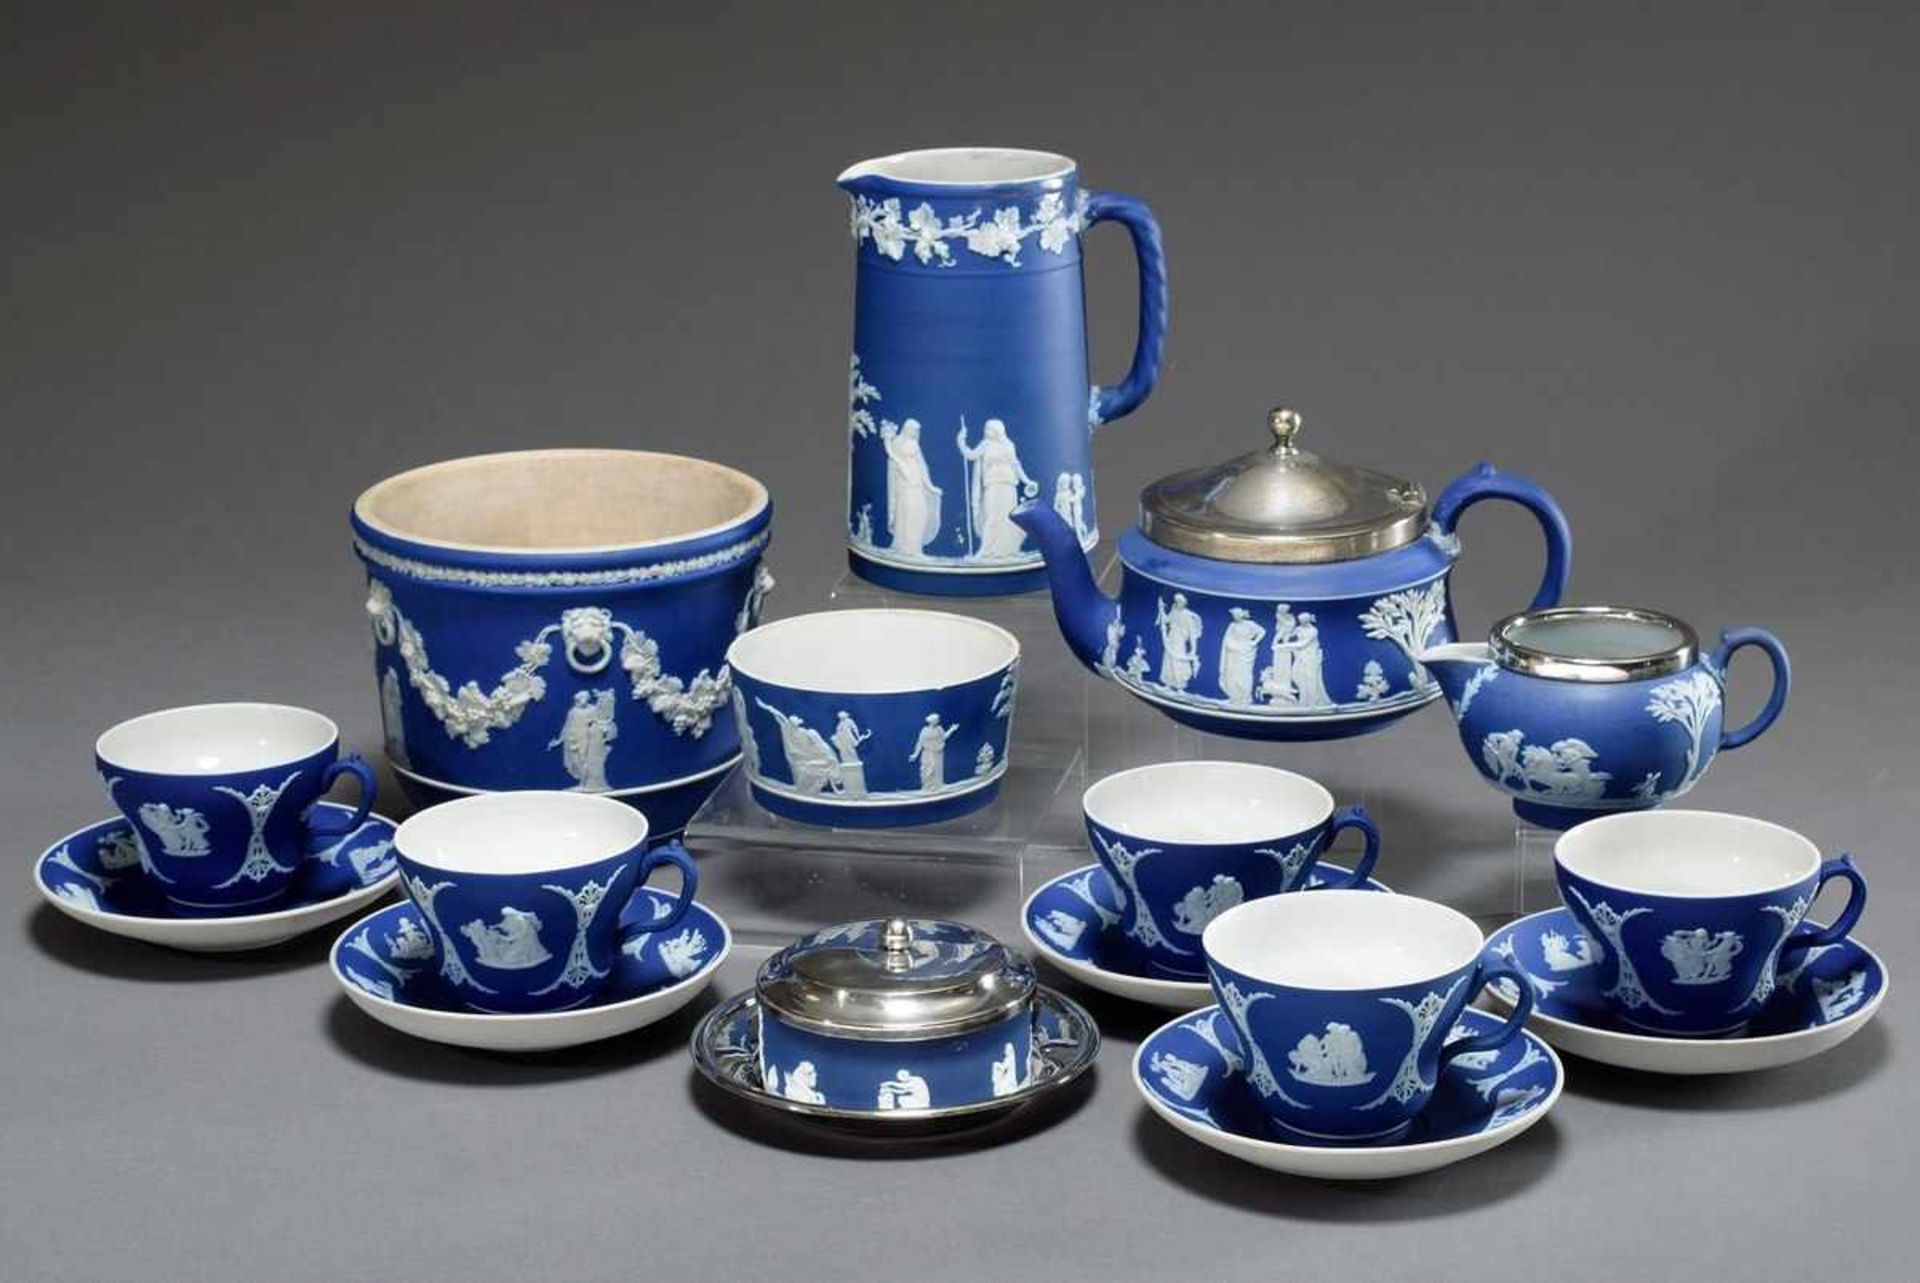 11 Various parts Wedgwood porcelain, light blue with antique scenes, consisting of: 5 cups/saucer (